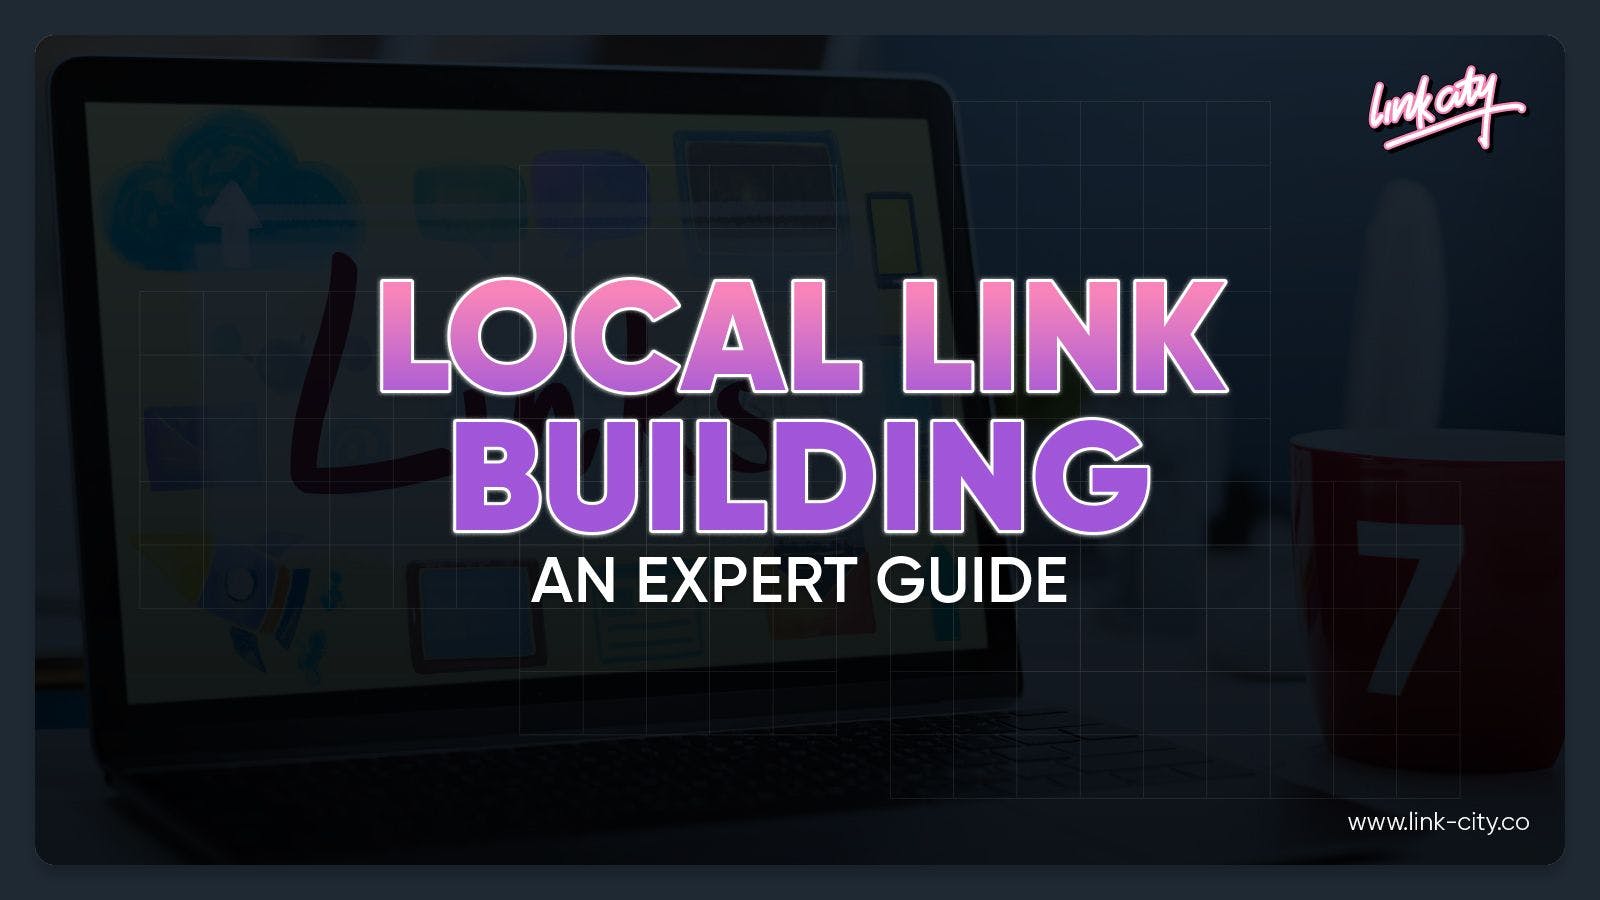 Local Link Building - An Expert Guide